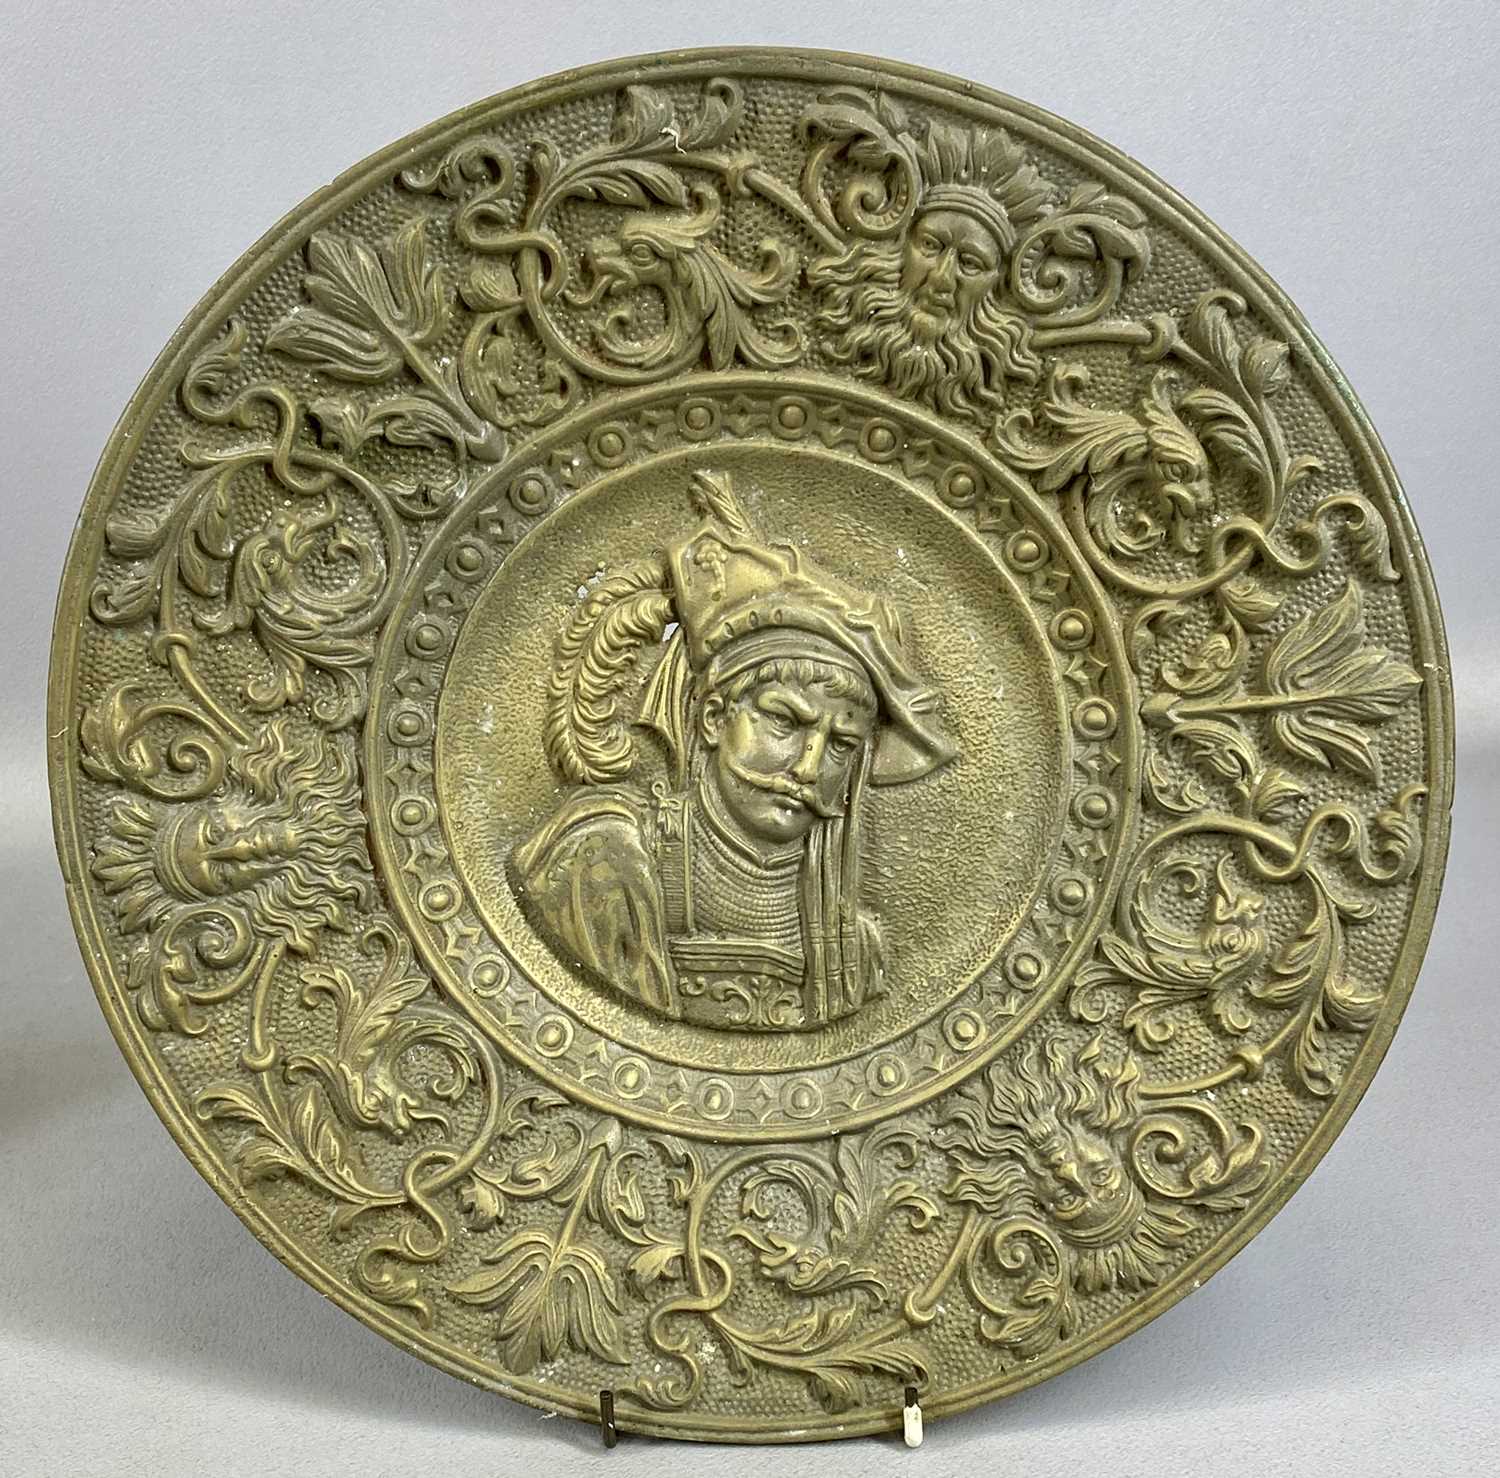 HEAVY CIRCULAR CAST METAL WALL PLAQUES A PAIR, French Renaissance style with portrait of a man to - Image 4 of 4